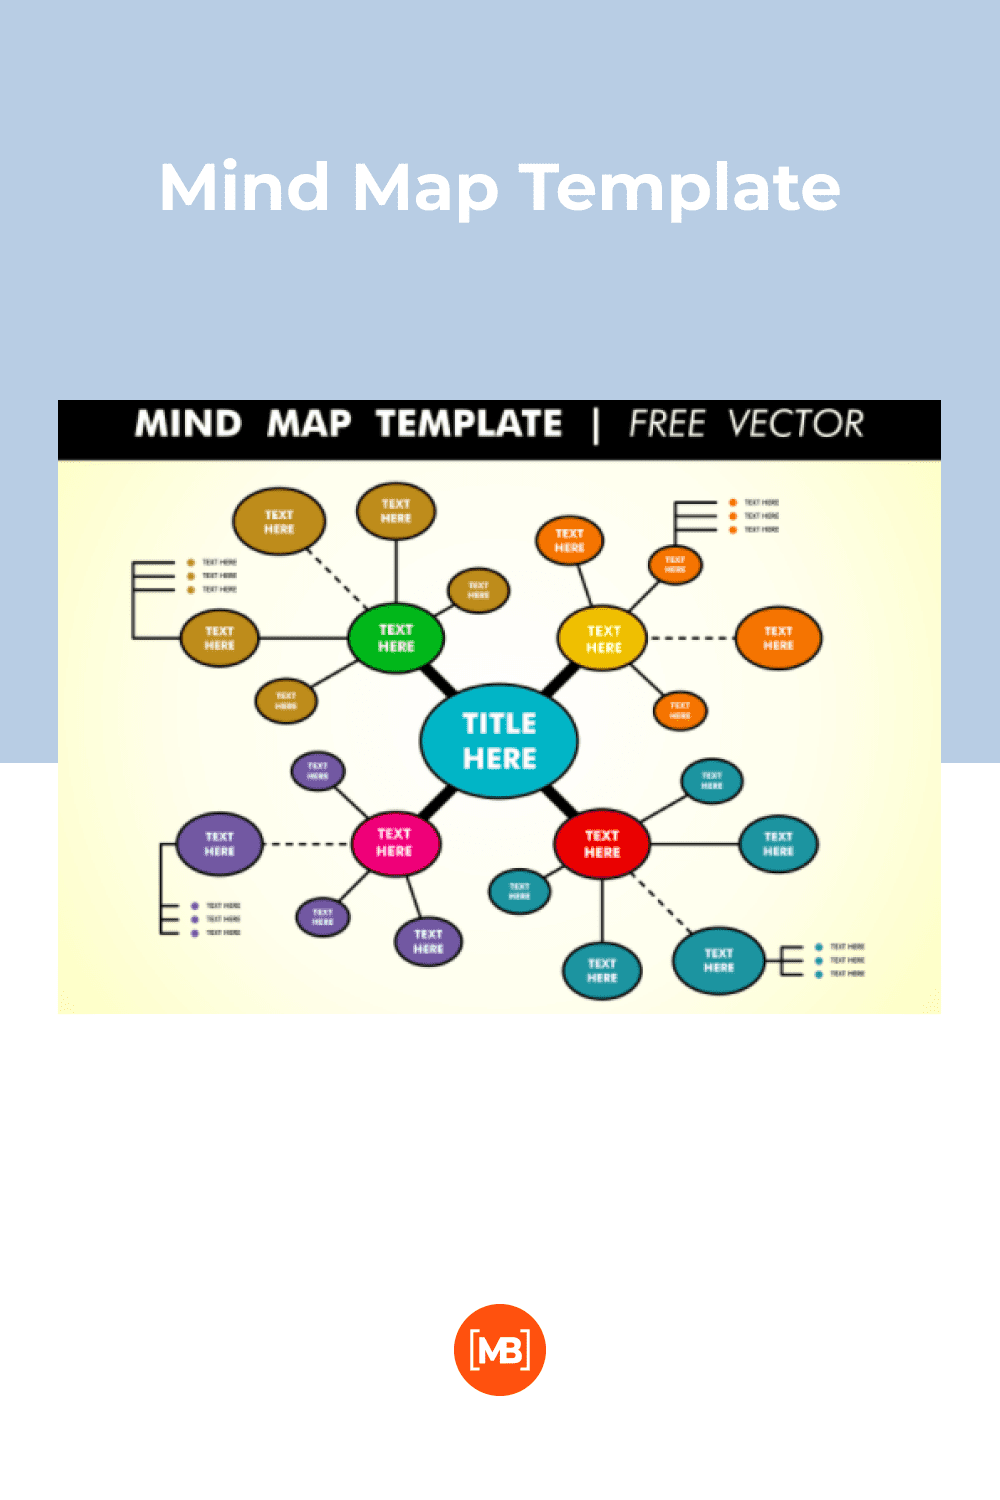 A 2000s-style mind map, when computers first appeared in widespread use.